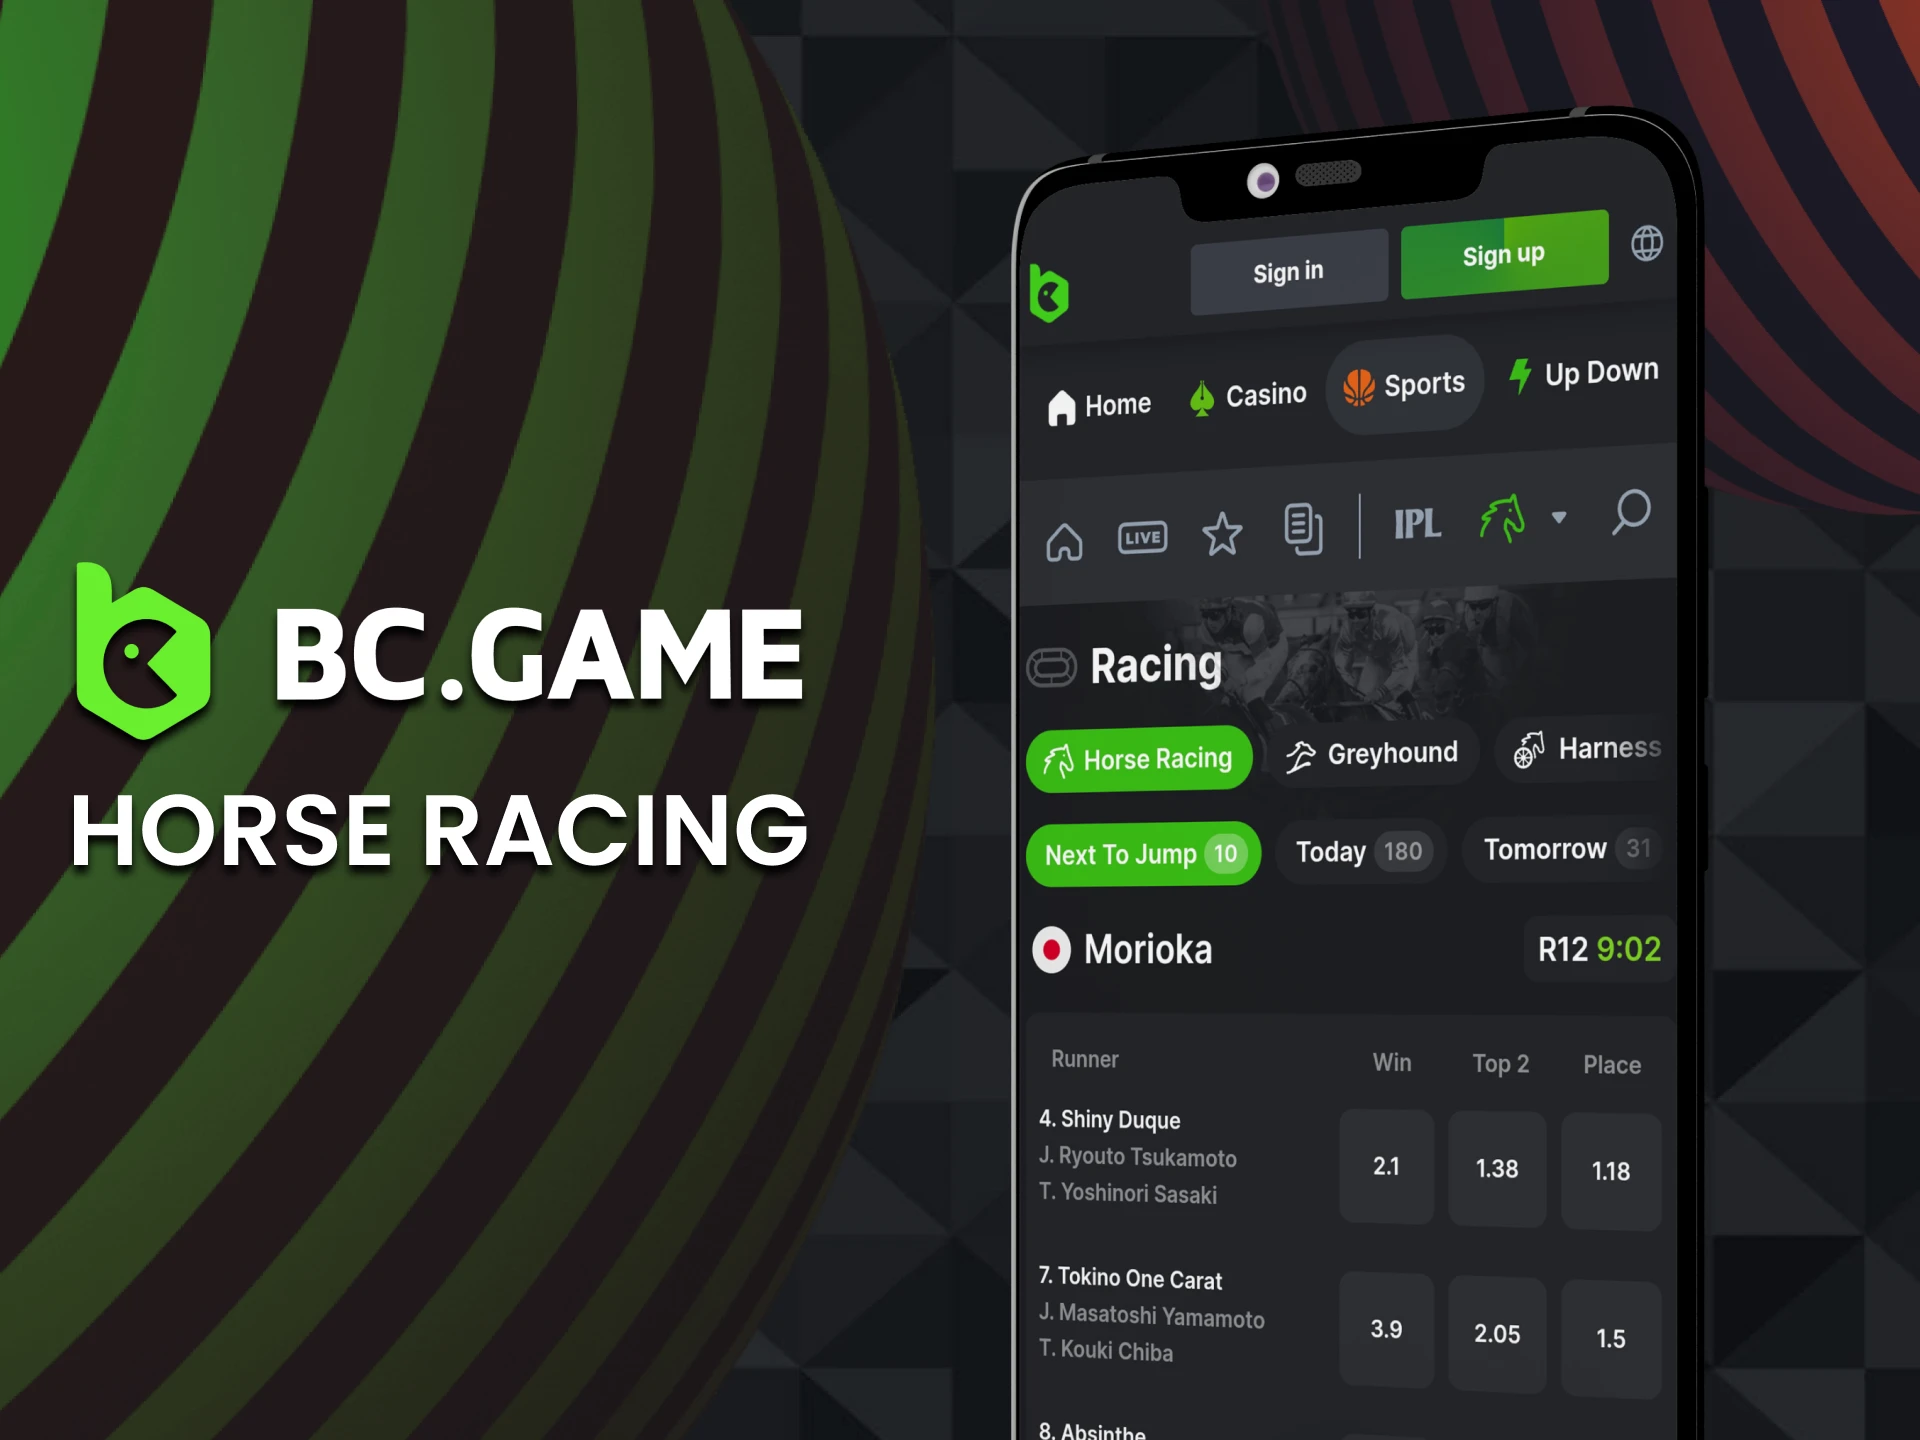 You can bet on horse racing using the BC Game app.